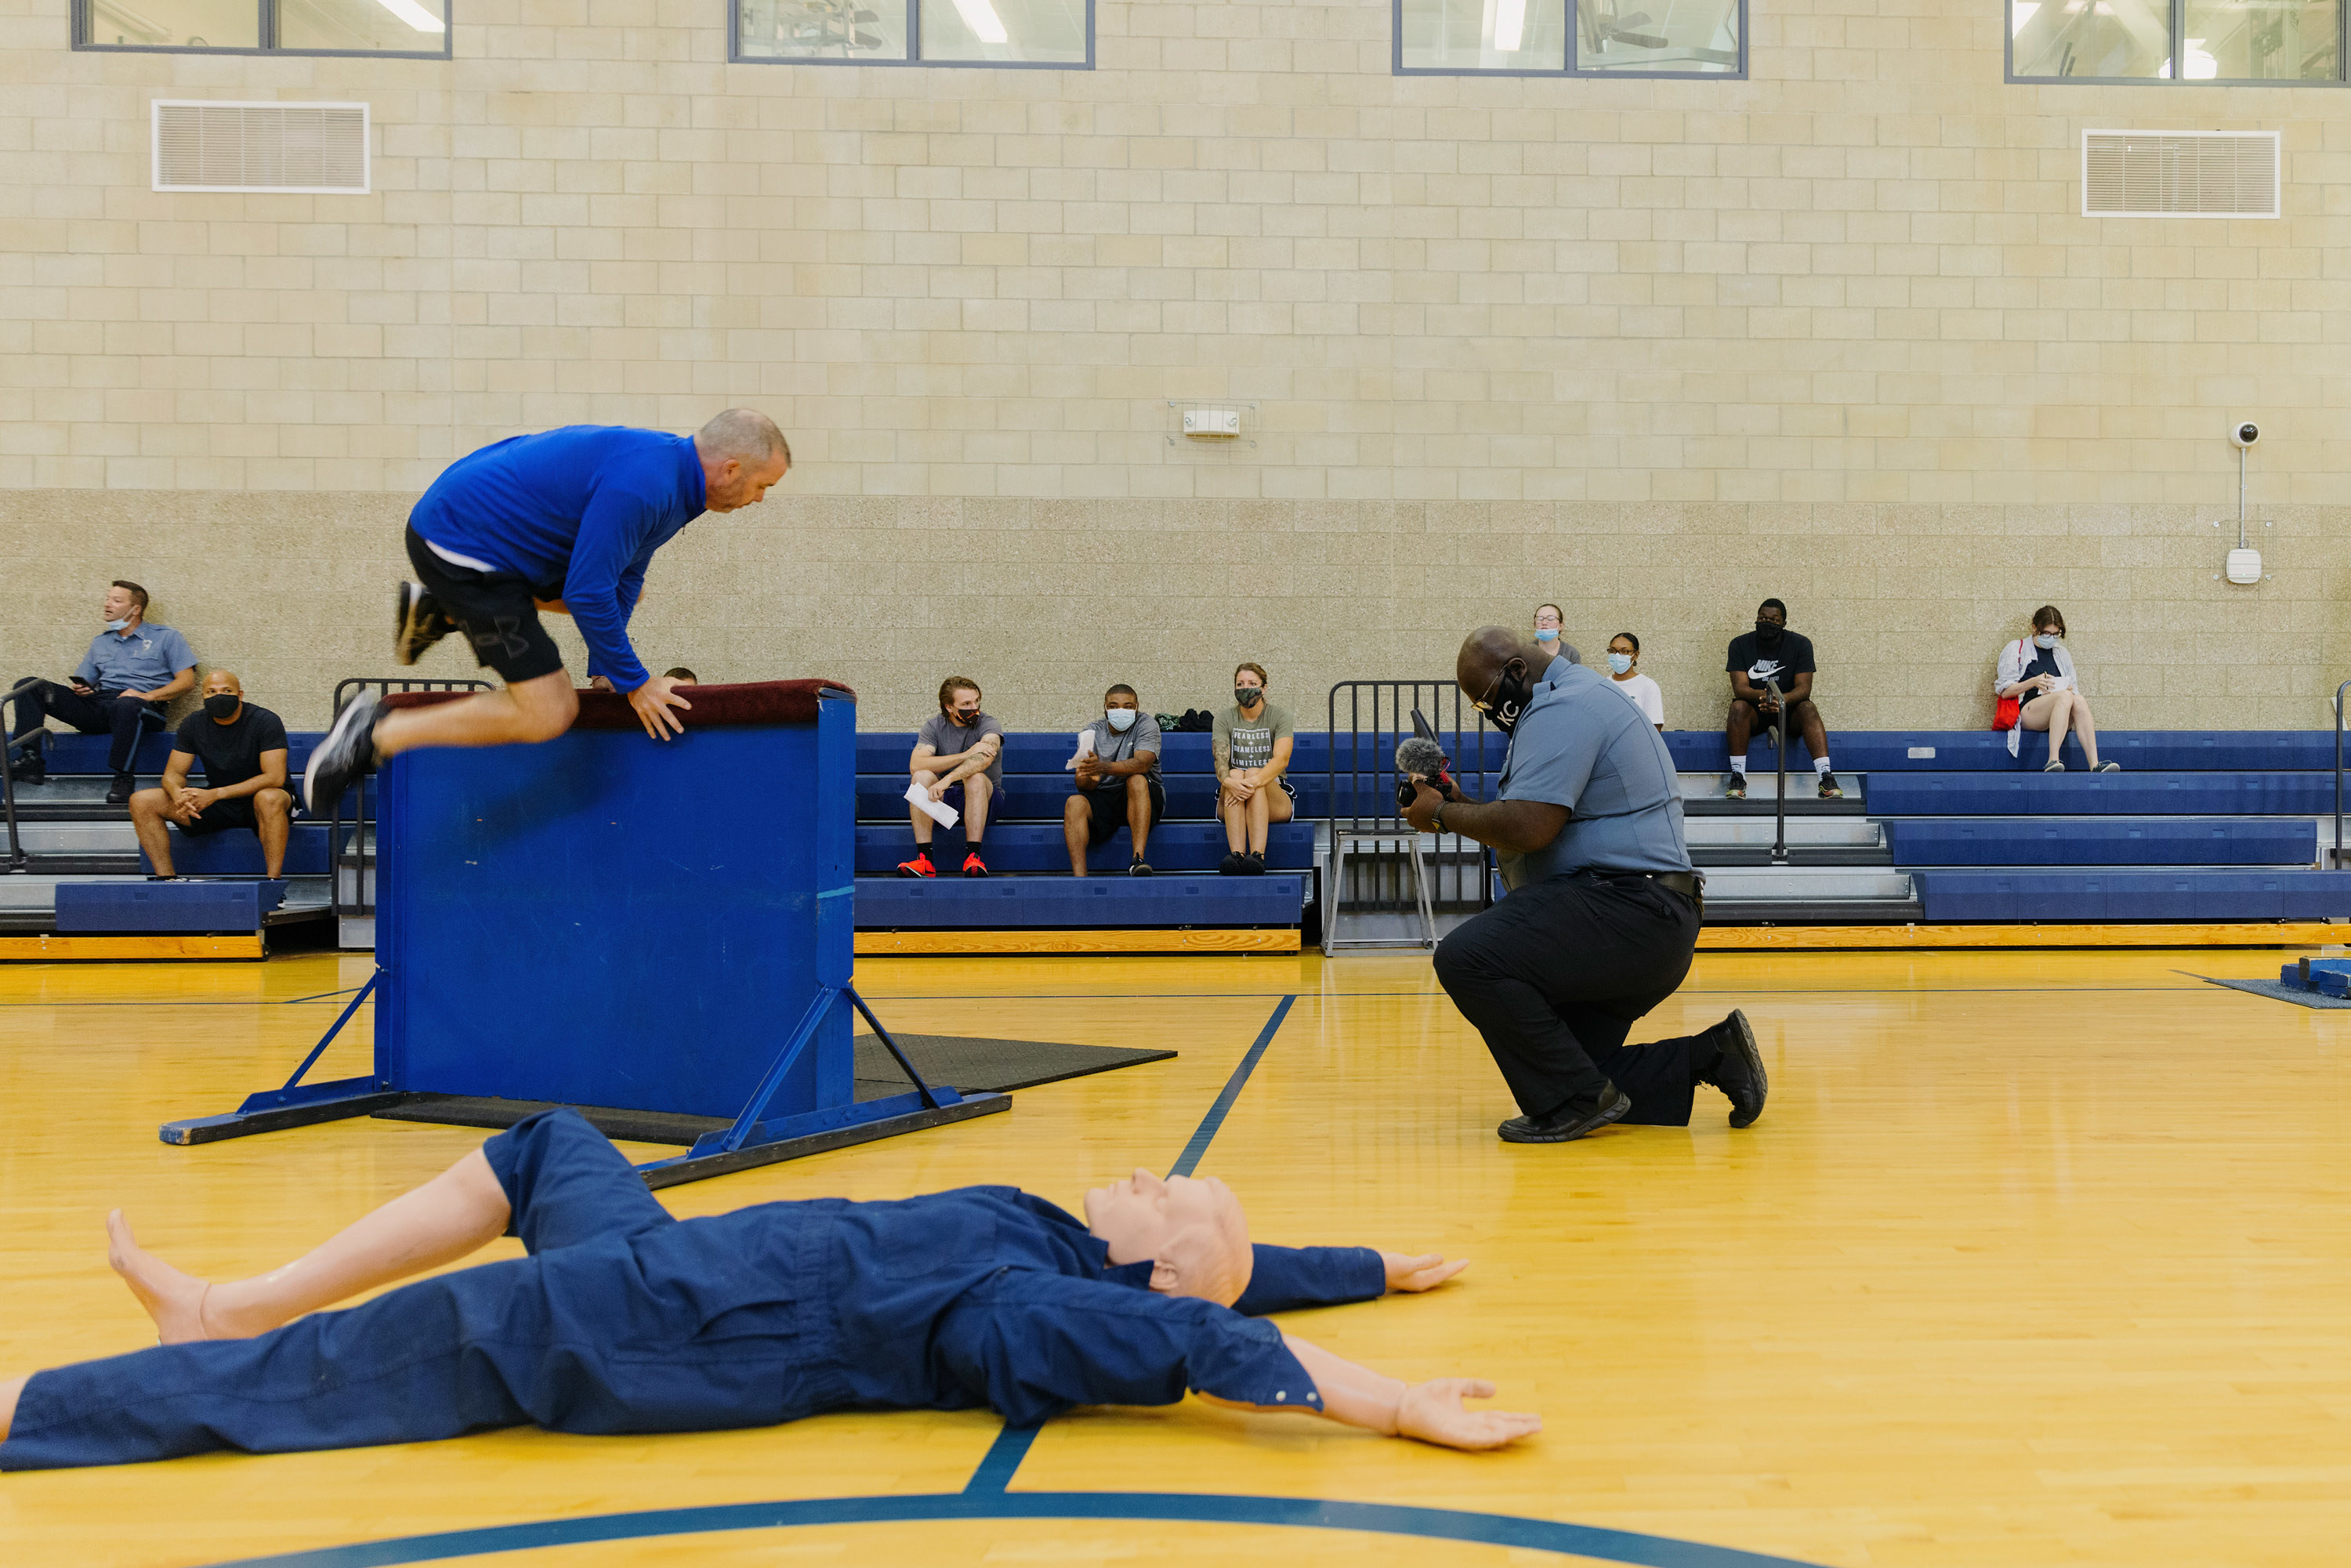 In a school gymnasium,  a man kneels and films another man hopping over a barricade